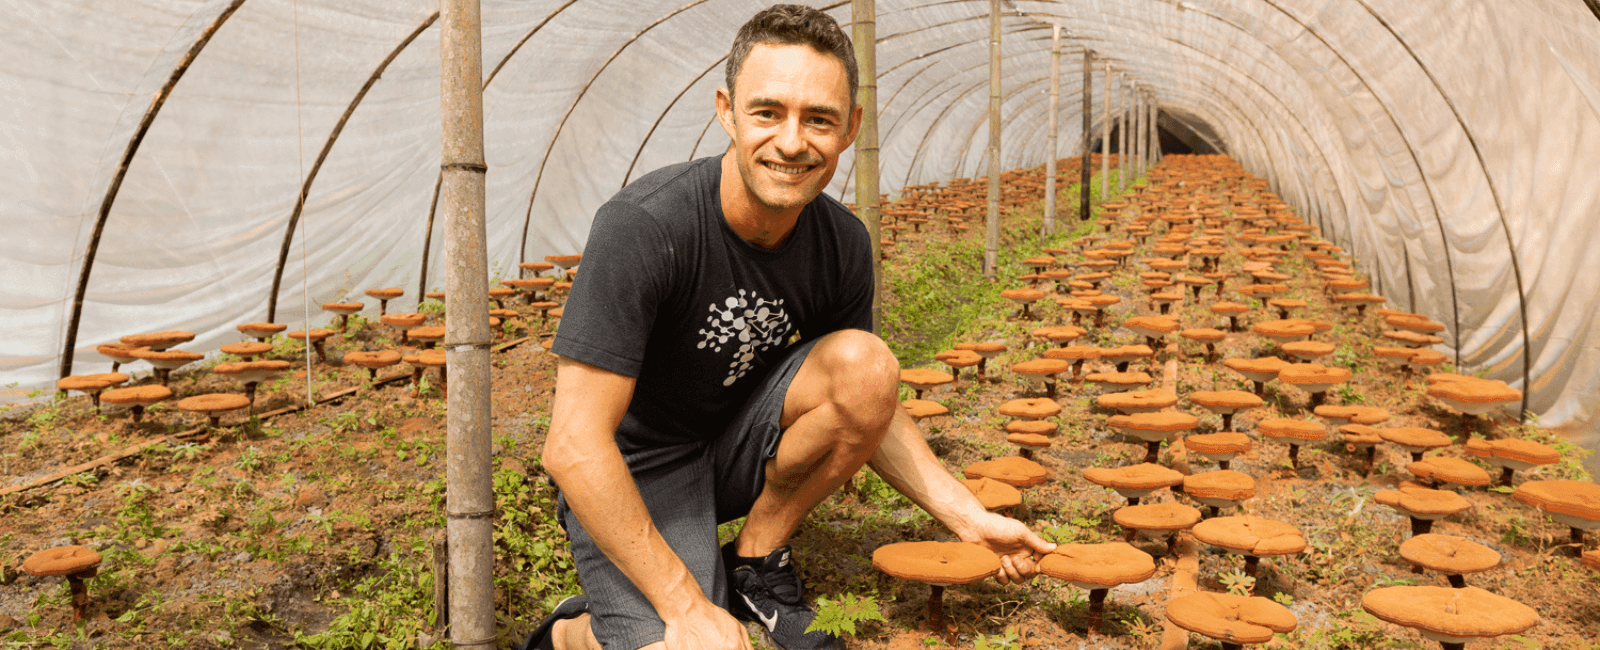 The Fight for Clear Mushroom Labeling with Skye Chilton of Real Mushrooms